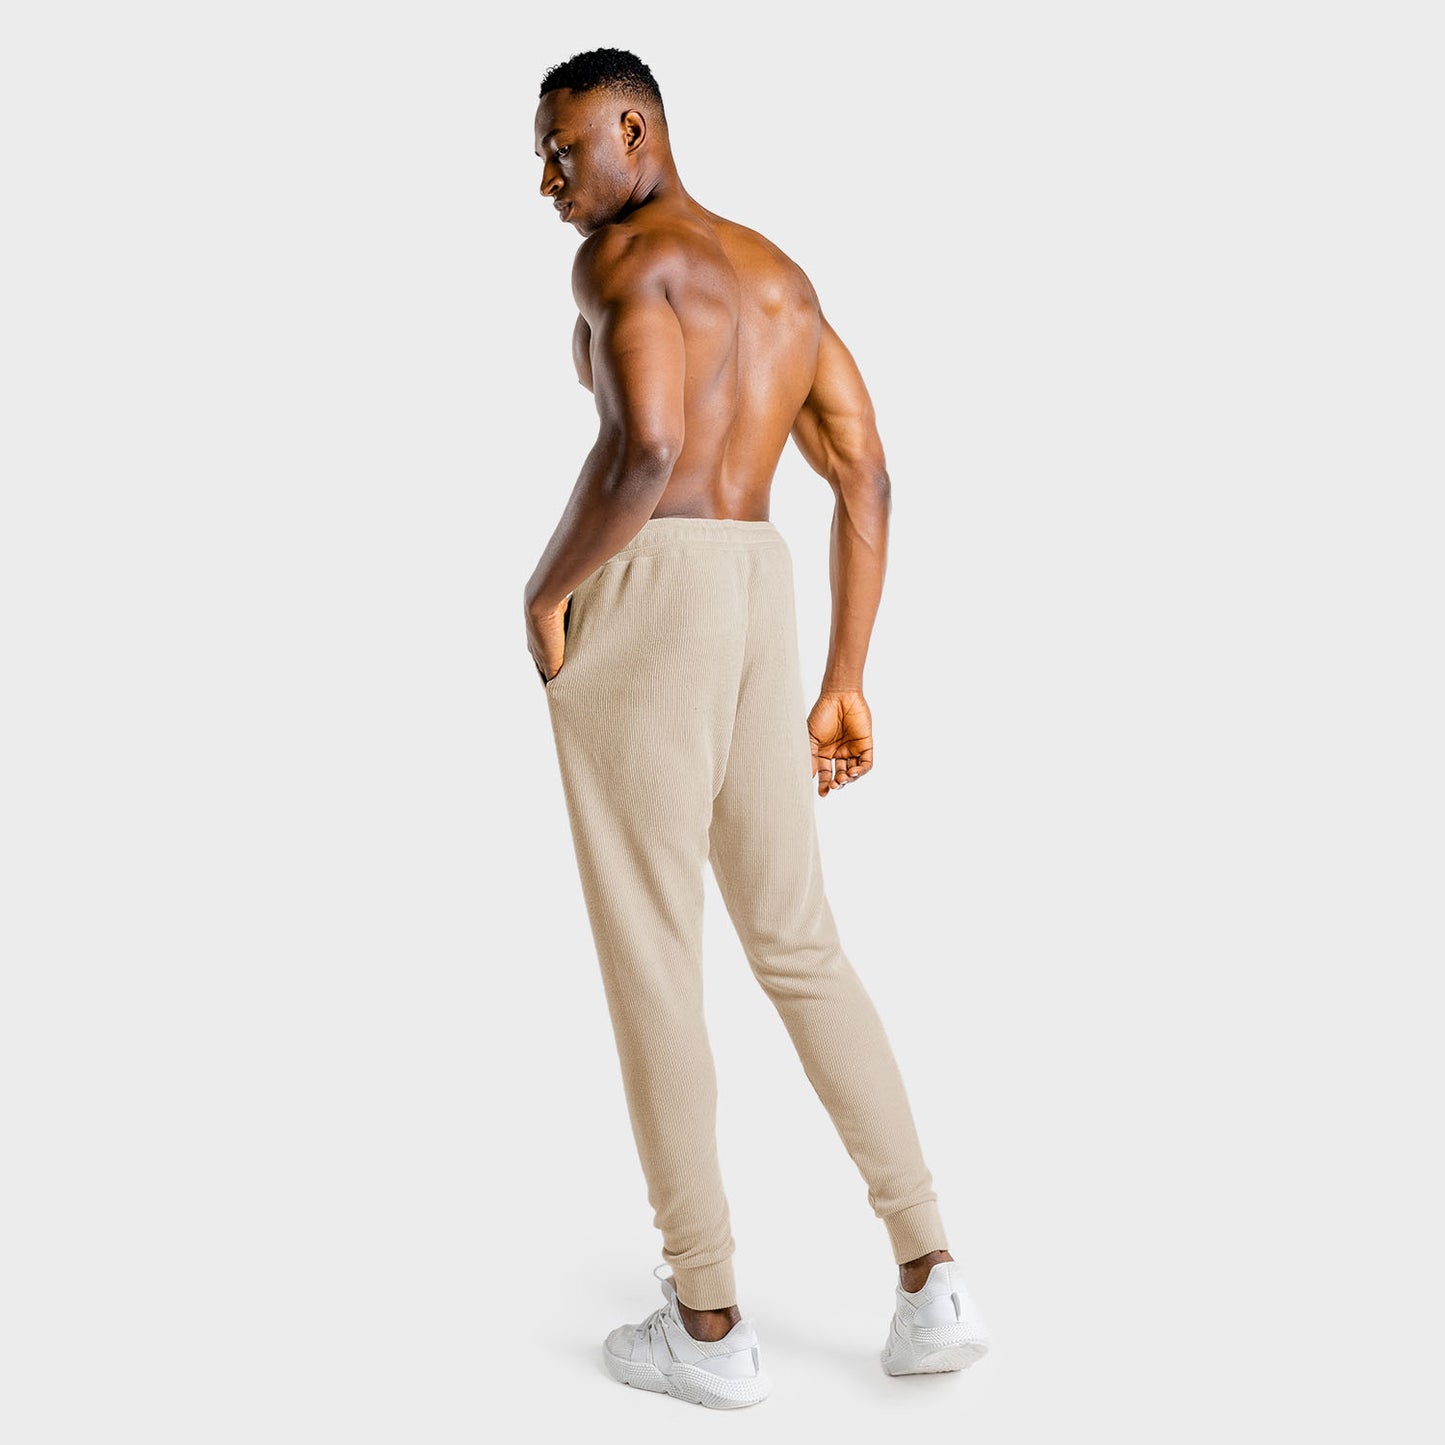 squatwolf-gym-wear-luxe-joggers-stone-workout-pants-for-men